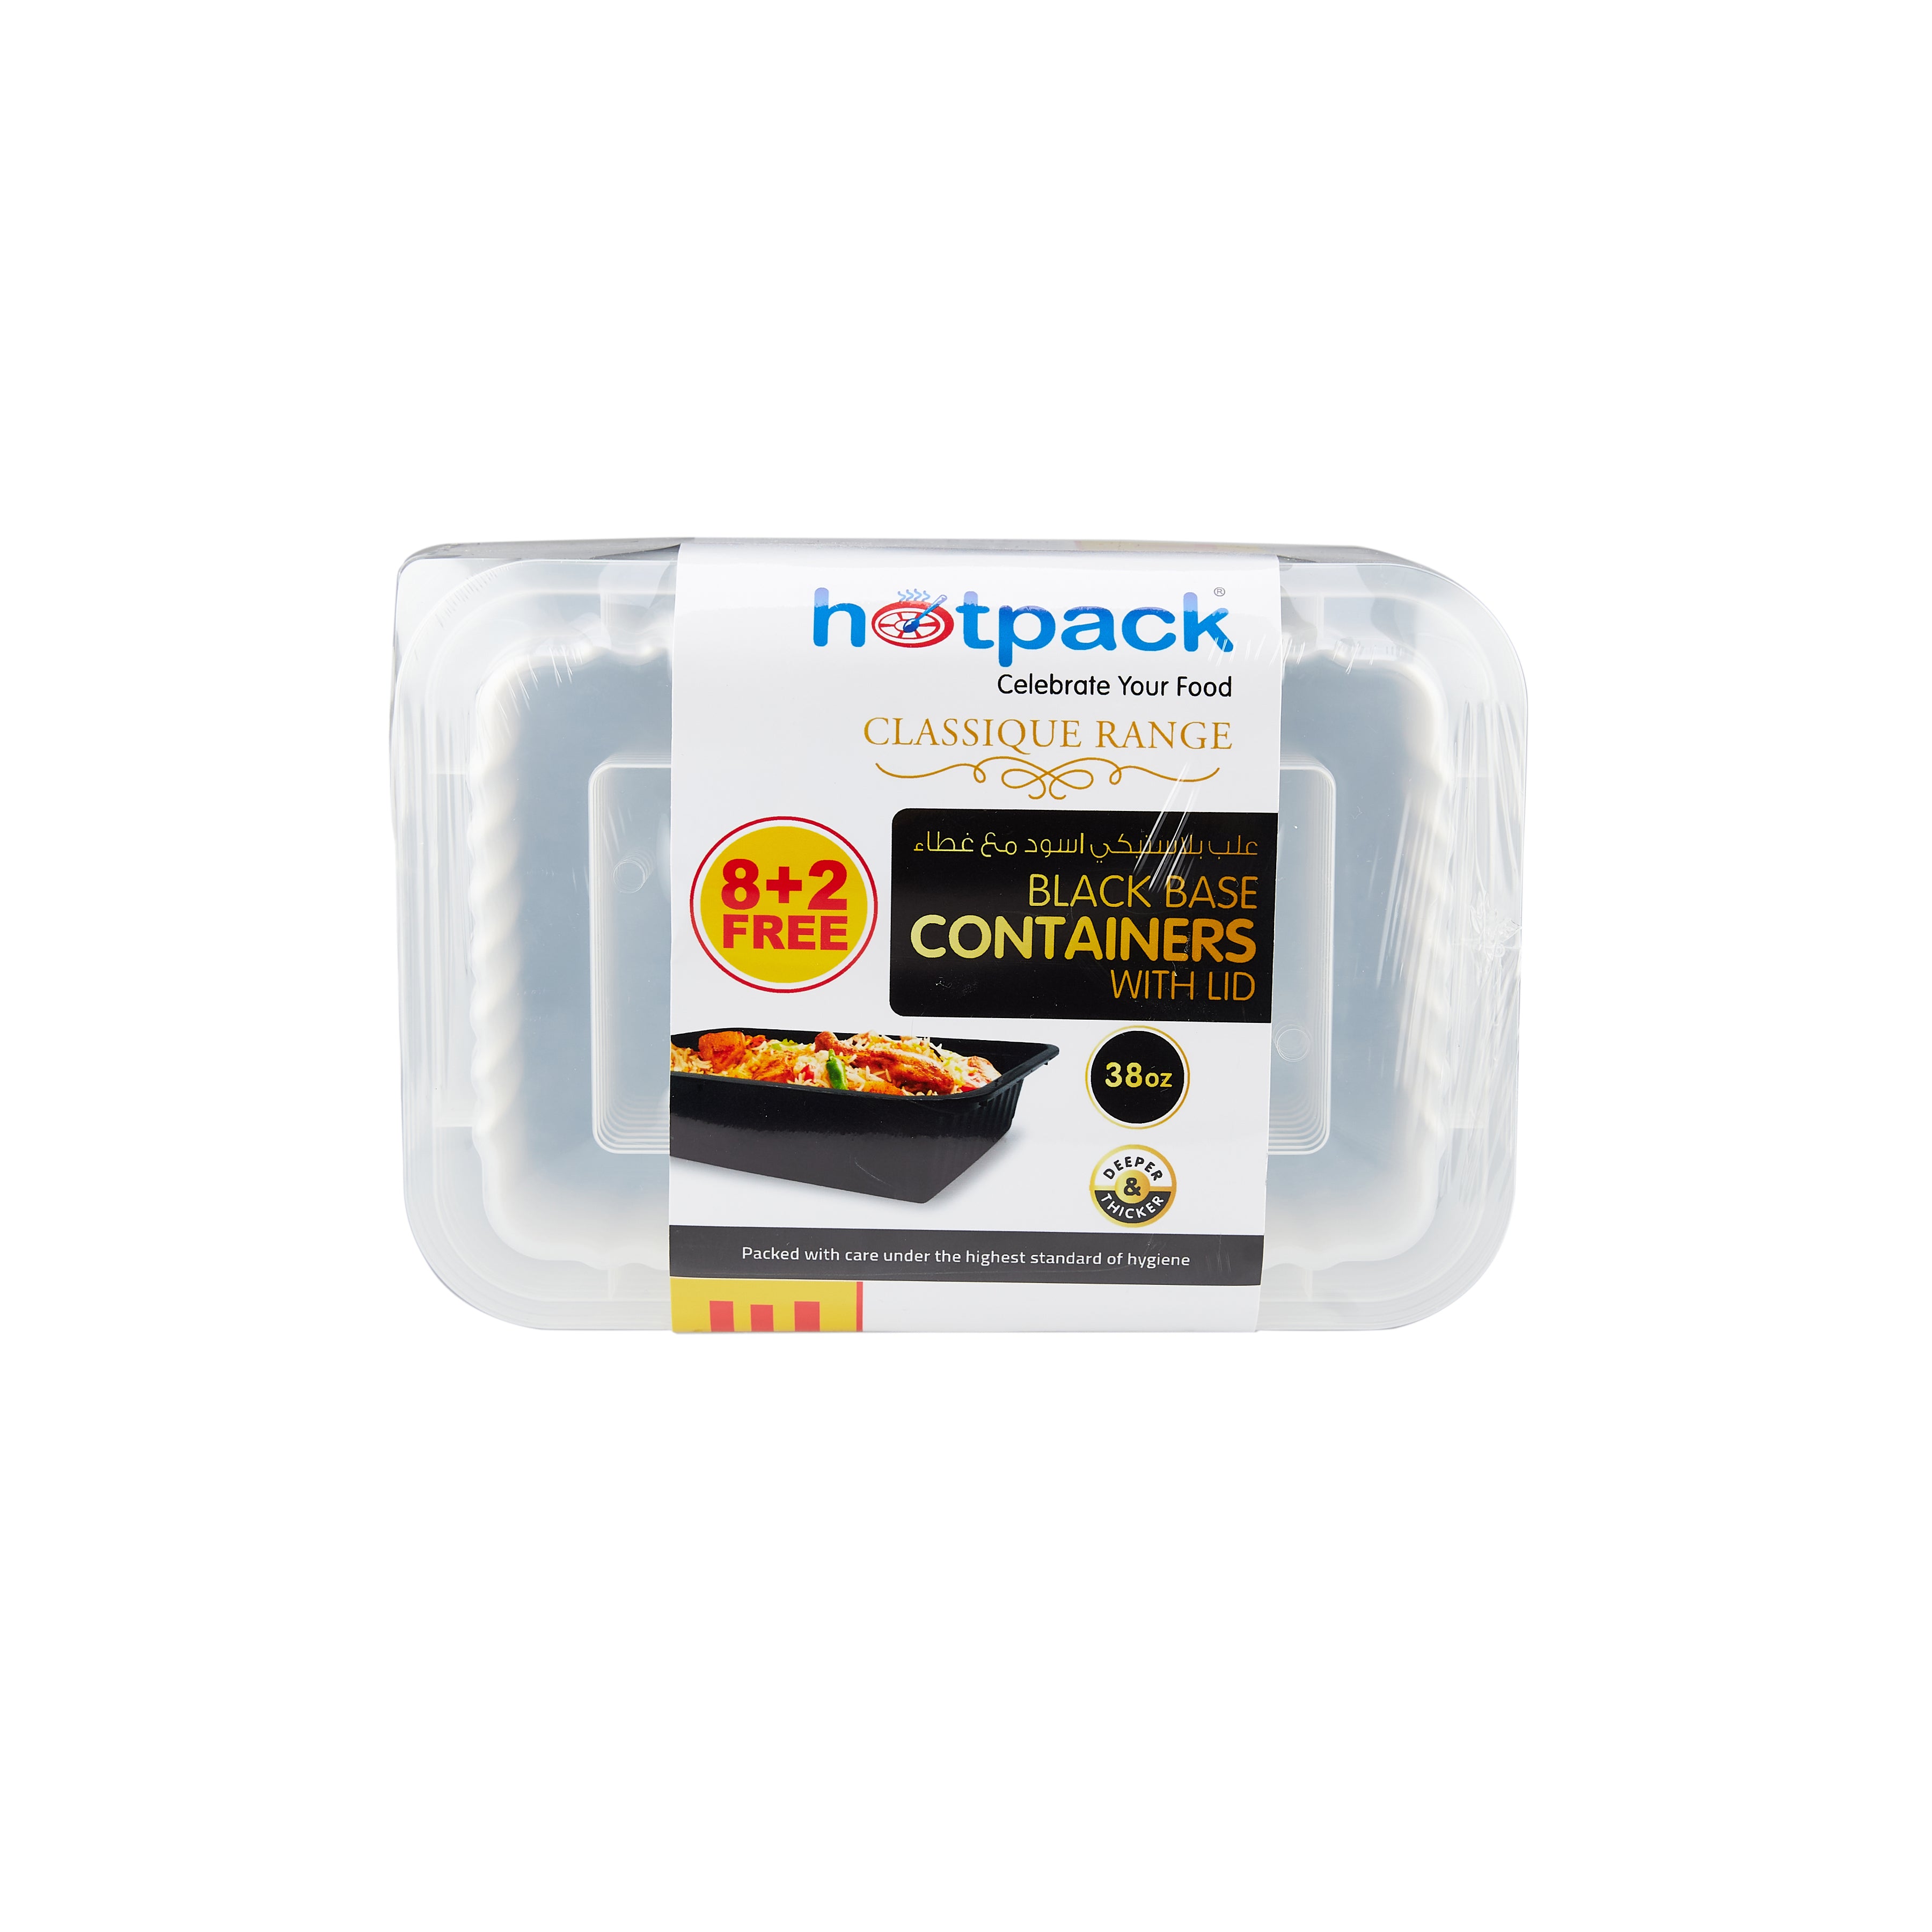 Black Base Container 38 oz with Lids 8 + 2 Free (10 Pieces) - hotpackwebstore.com